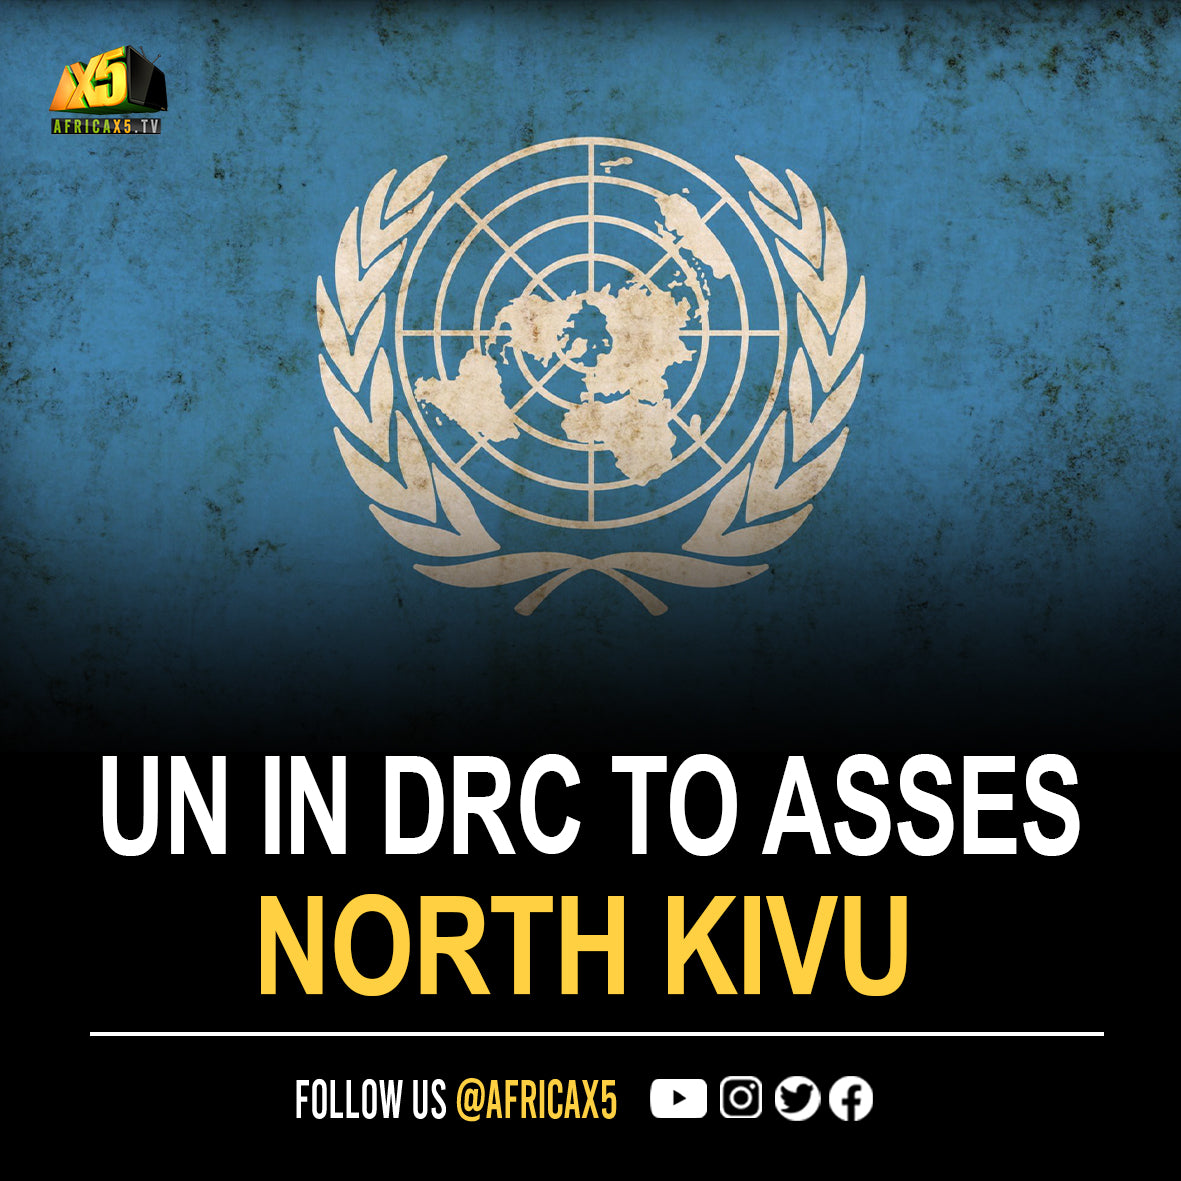 UN delegation in the DRC to assess situation in North Kivu province